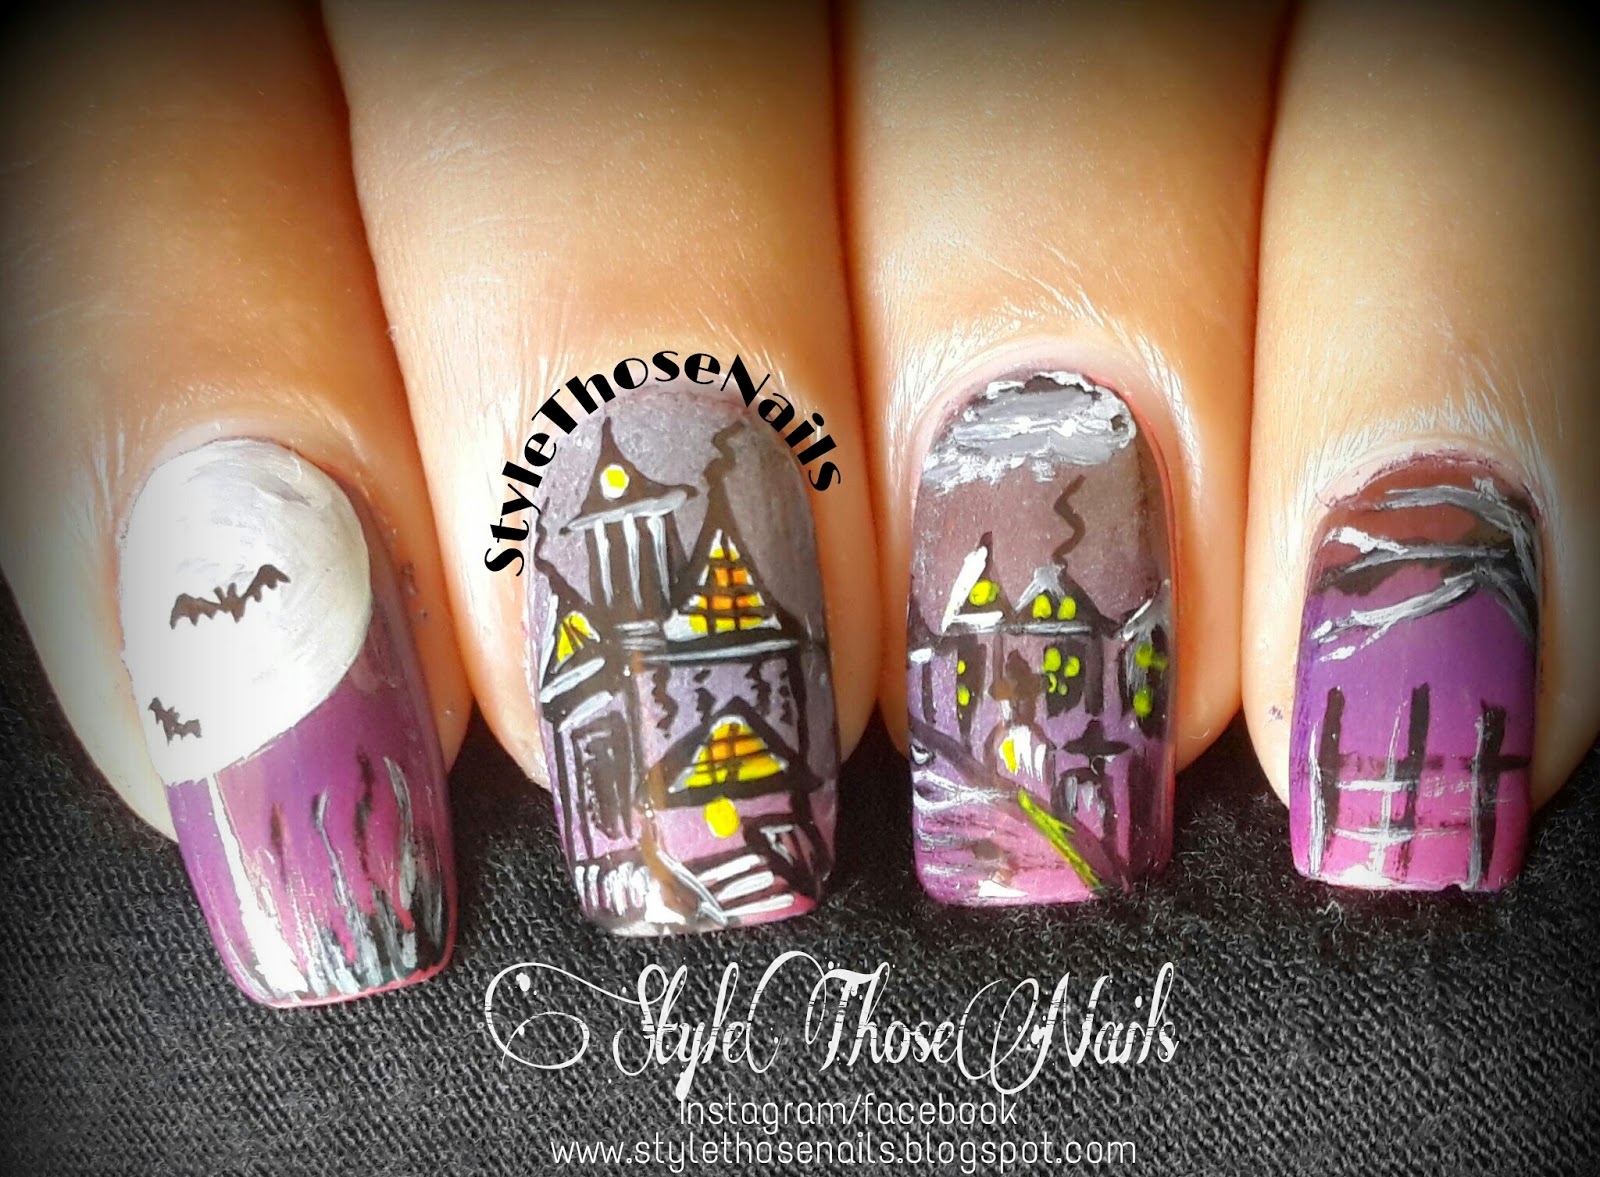 3. Haunted House Nails - wide 4